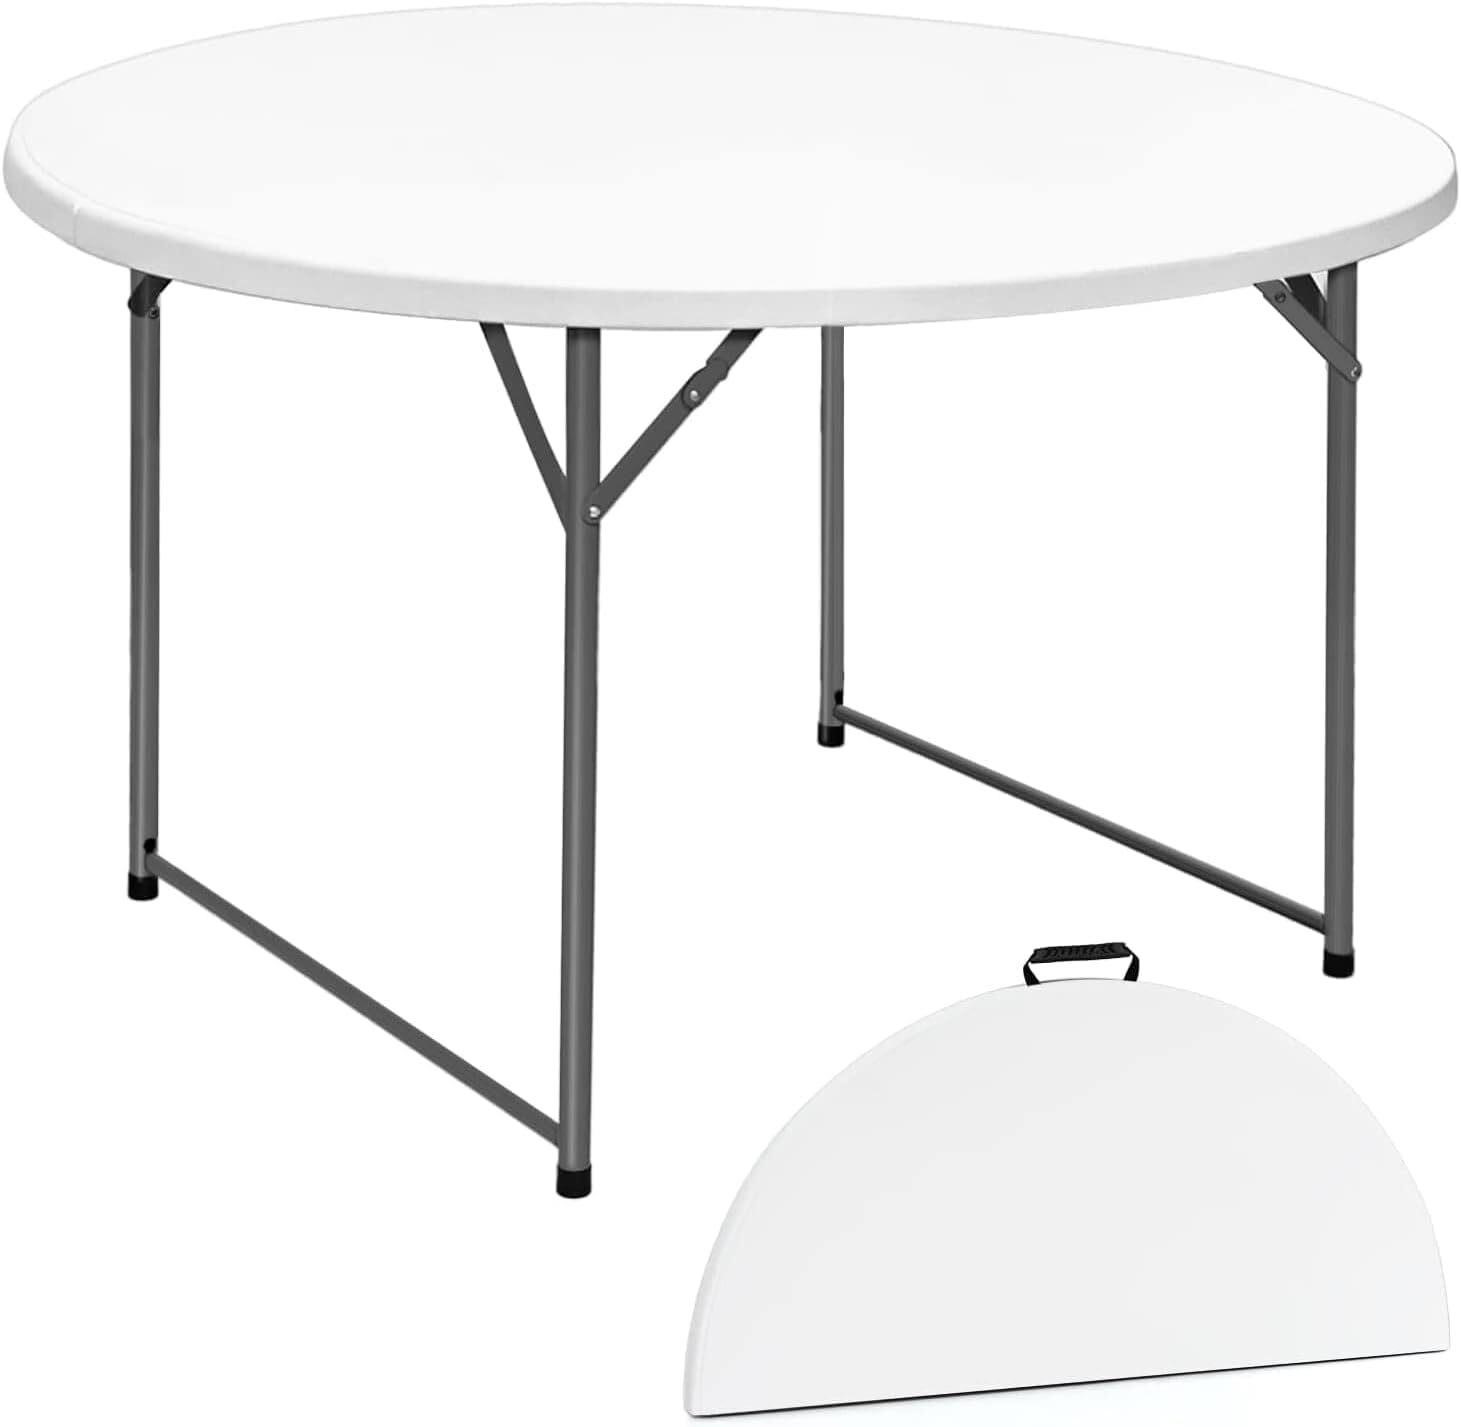 Heavy-Duty Folding Round Table - 48 Inches